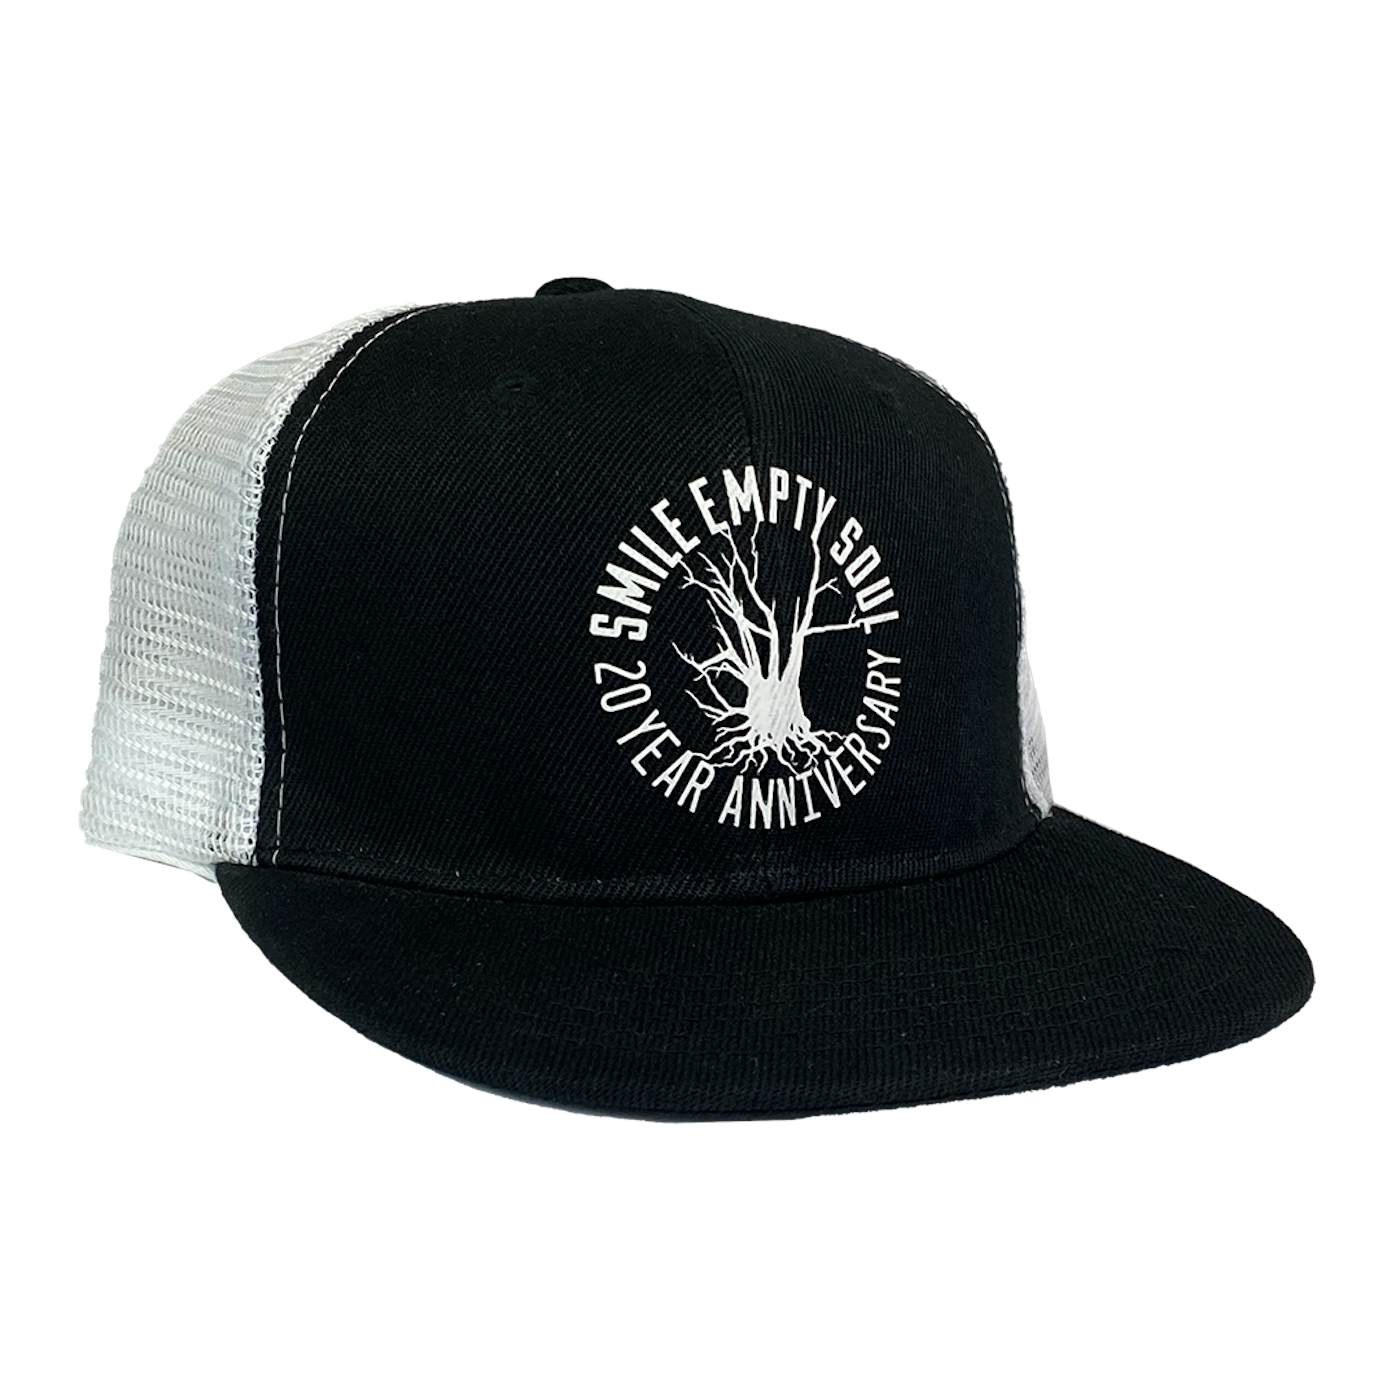 Smile Empty Soul "20th Anniversary" Snapback Hat with White Net